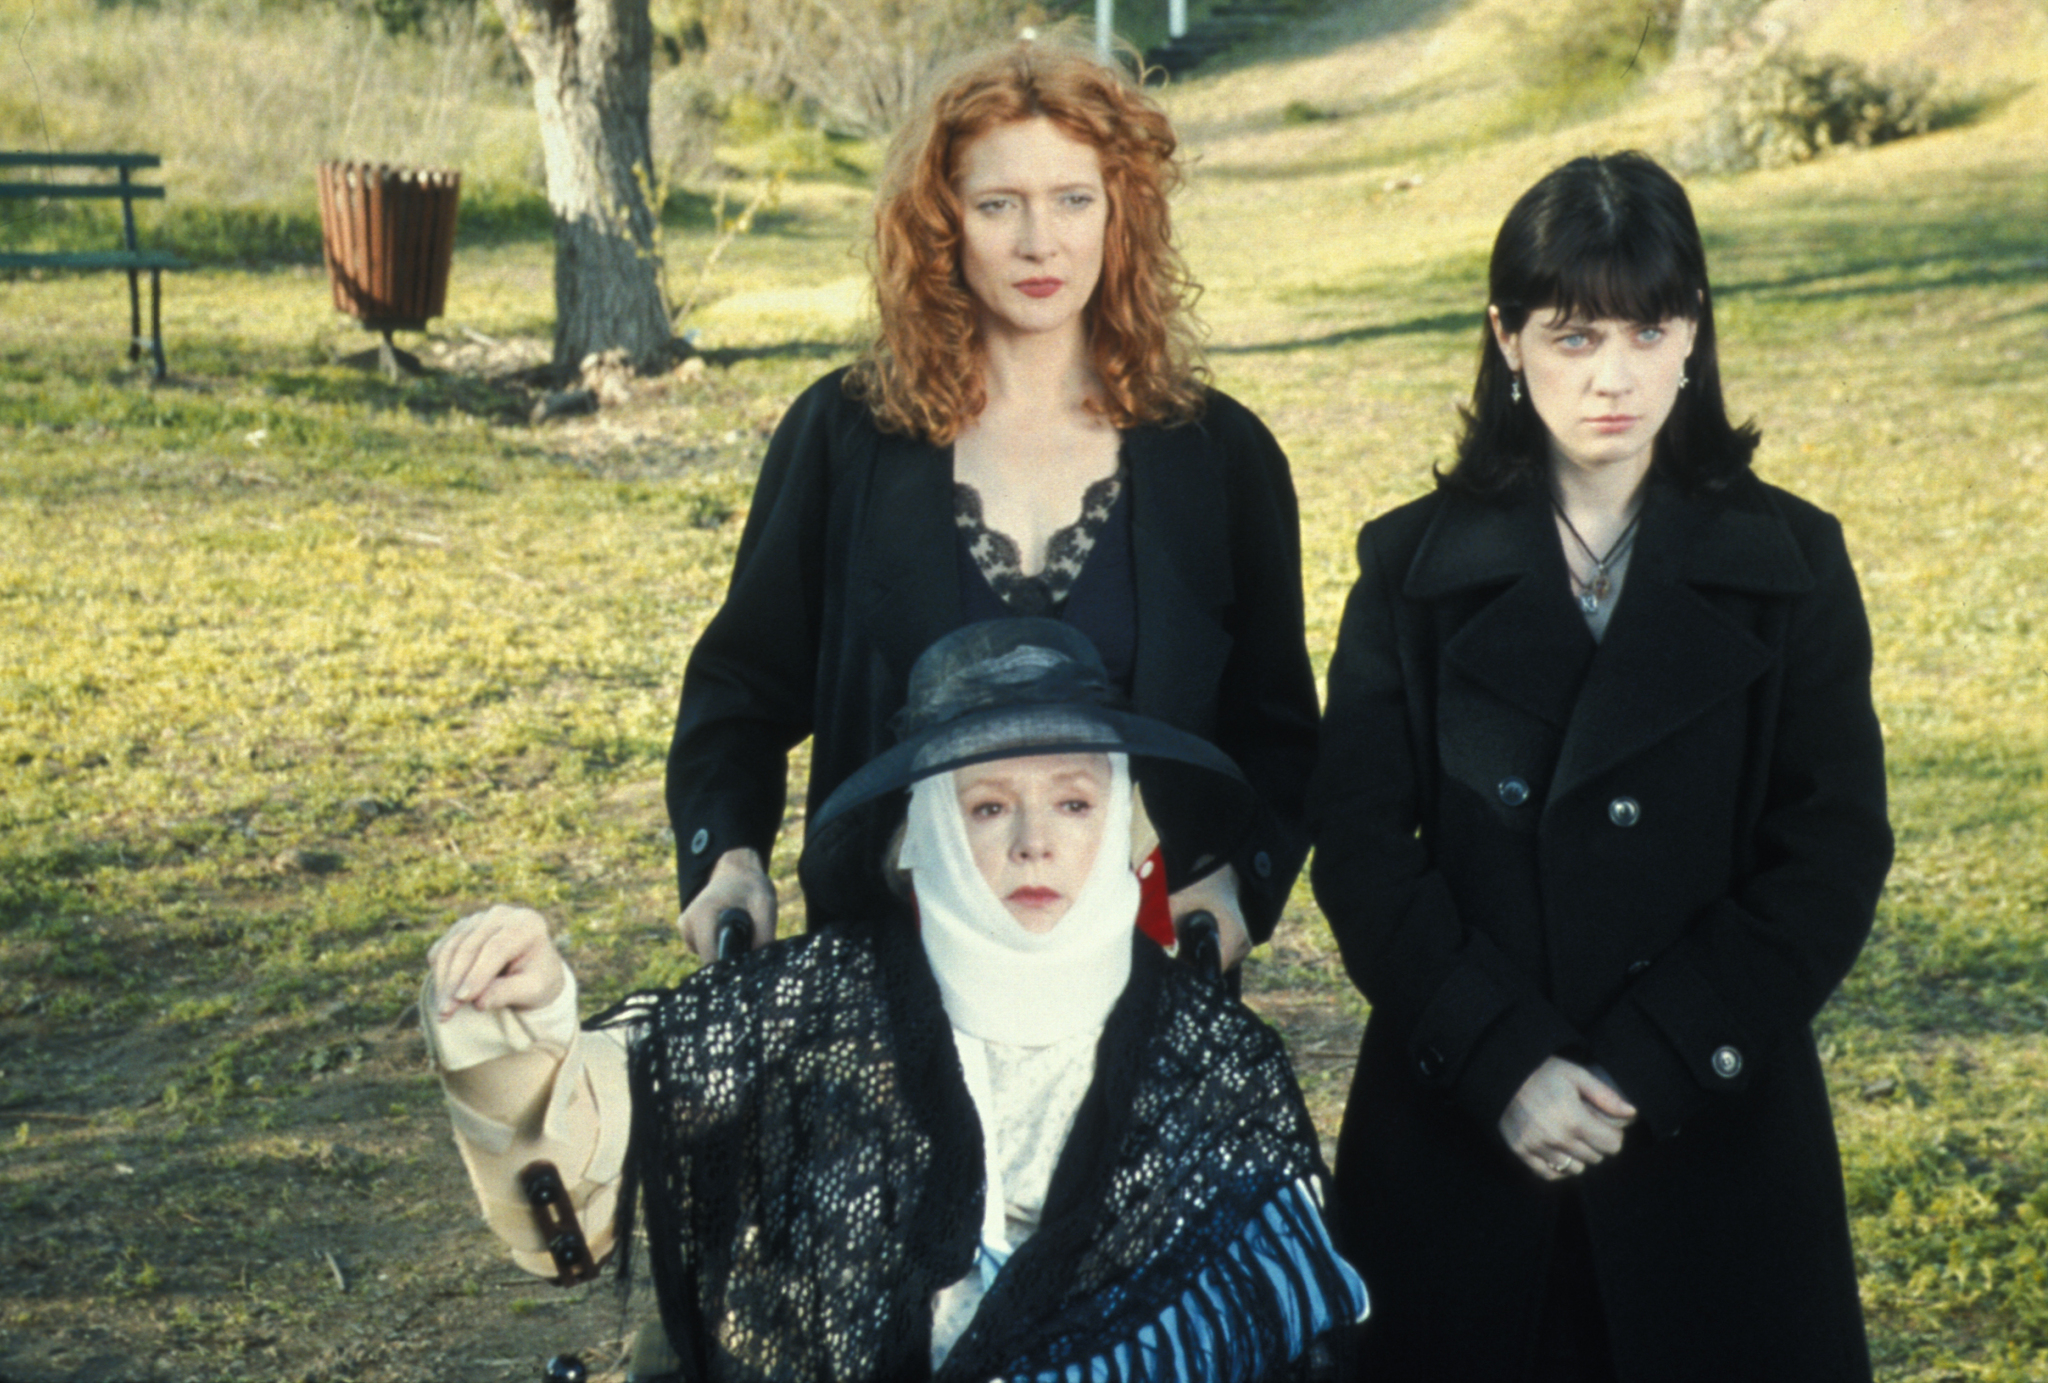 Still of Glenne Headly, Piper Laurie and Zooey Deschanel in Eulogy (2004)